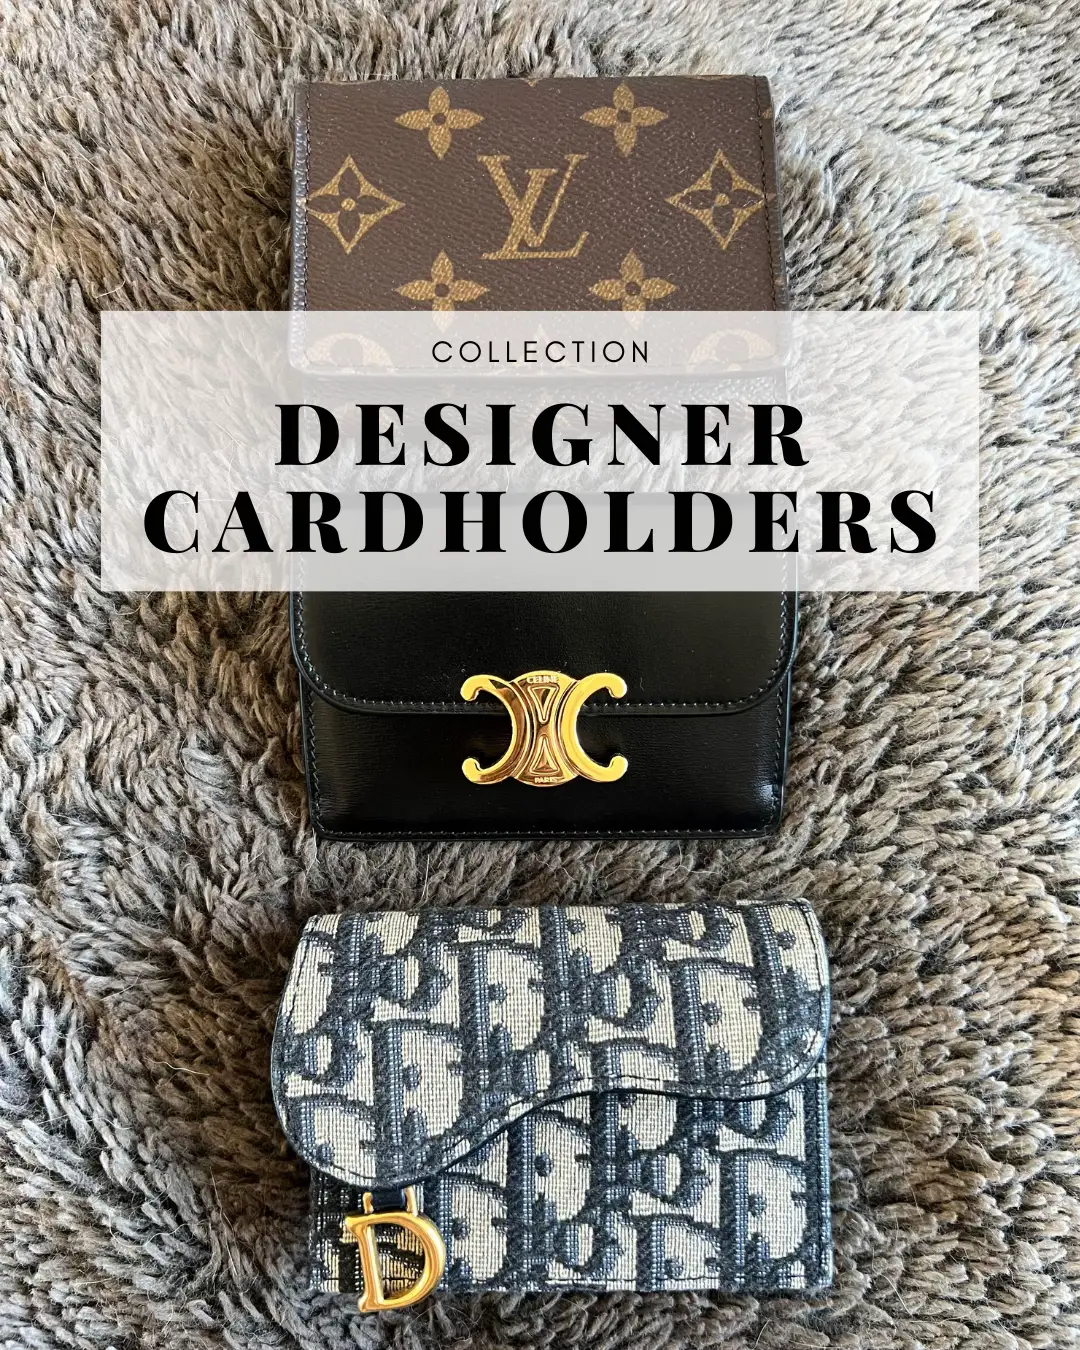 MY COLLECTION OF DESIGNER CARDHOLDERS